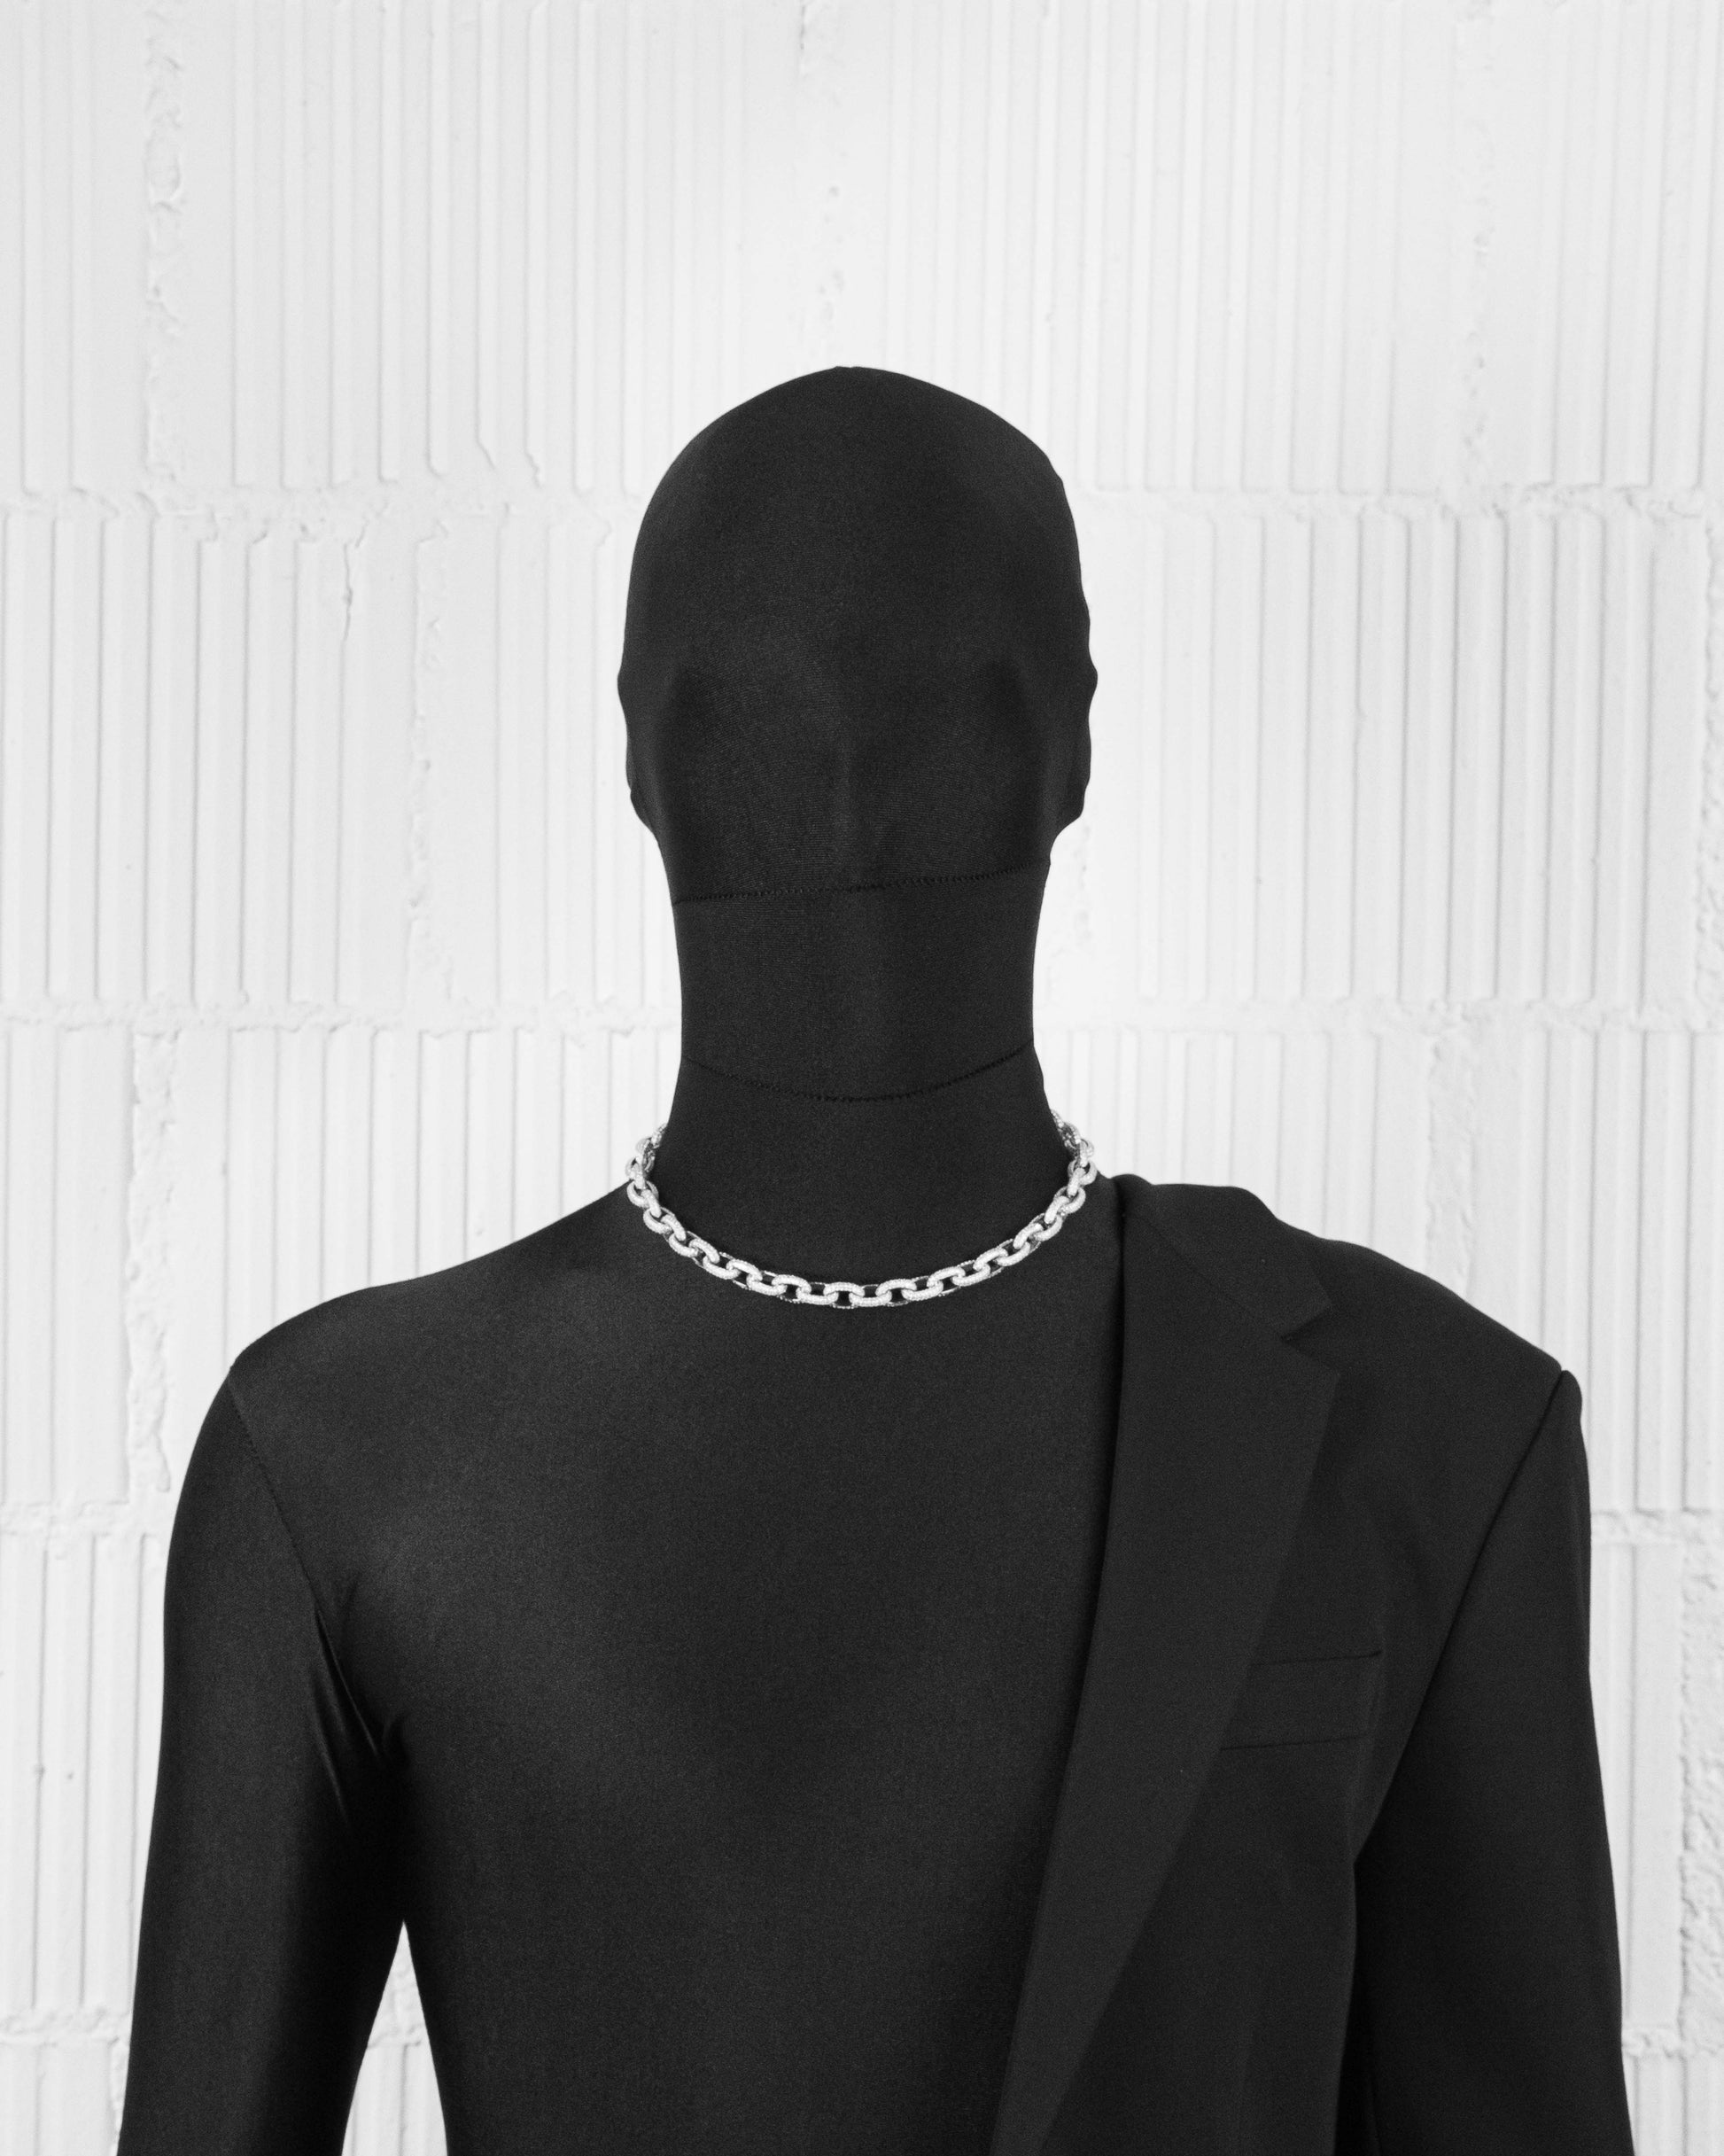 man with black suit wearing 18k white gold coated rolo chain necklace with all-around hand-set micropavé stones in white